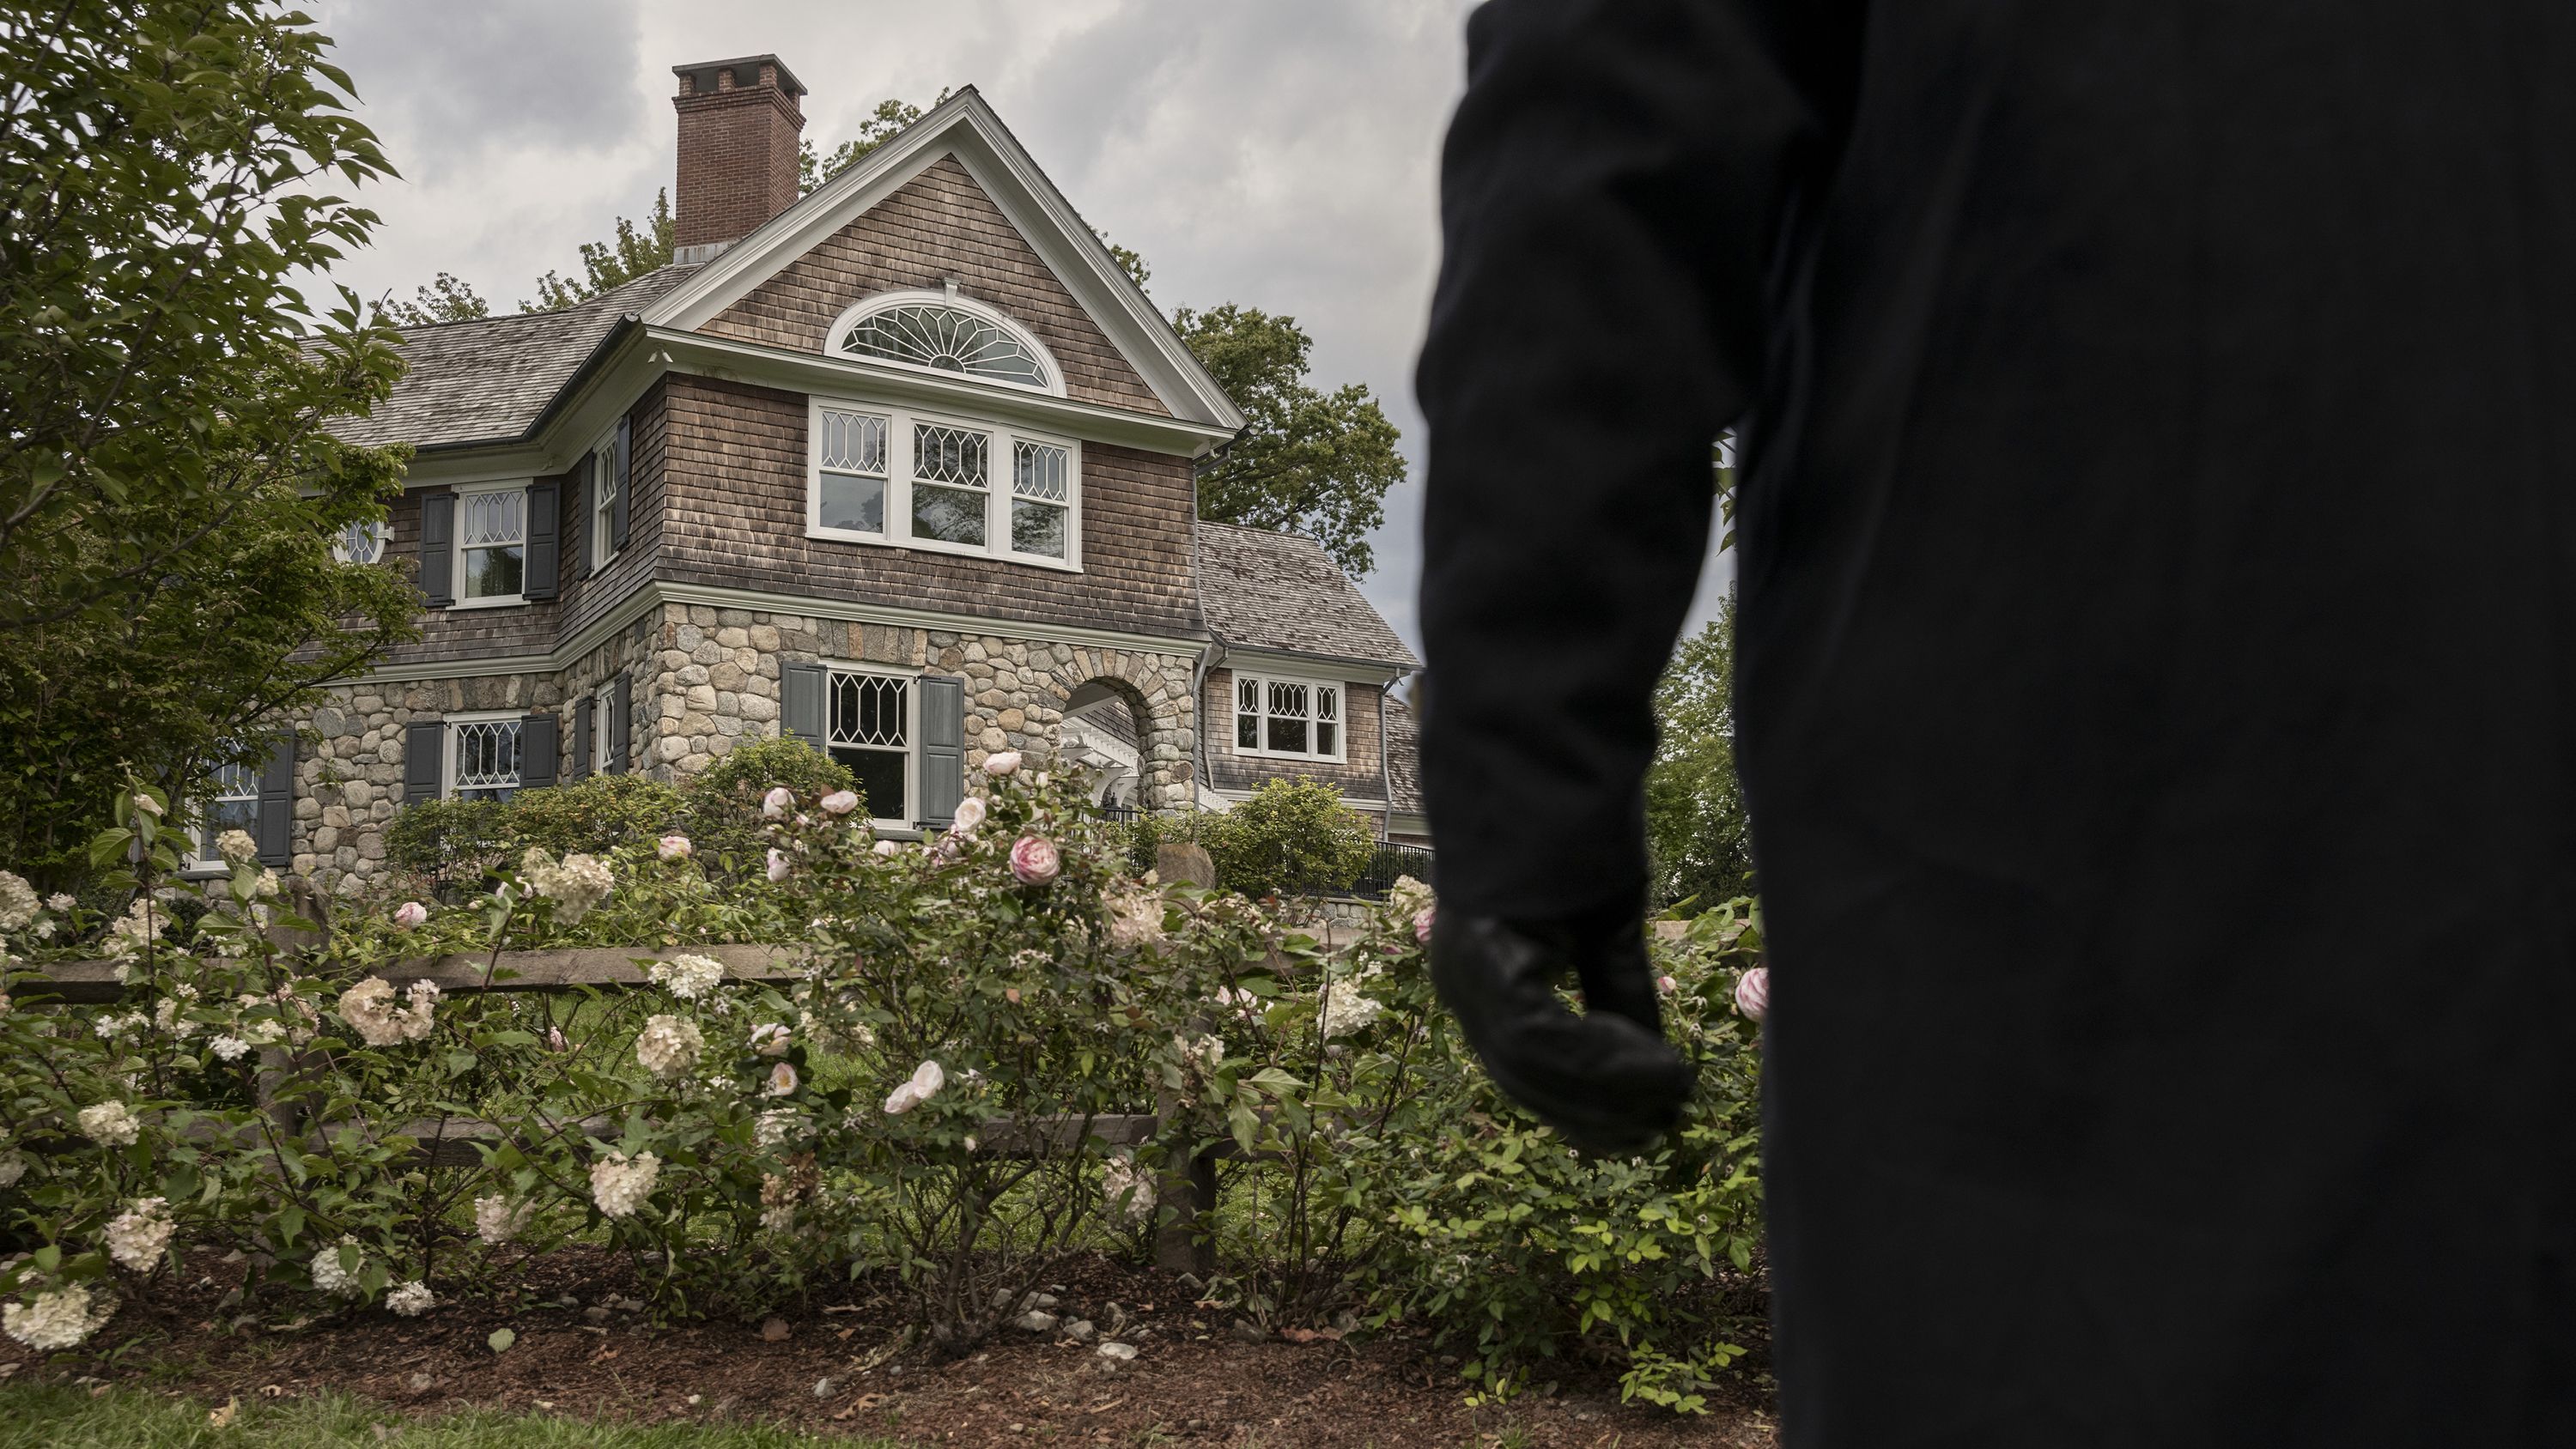 657 Boulevard: All About The Real House That Inspired 'The Watcher